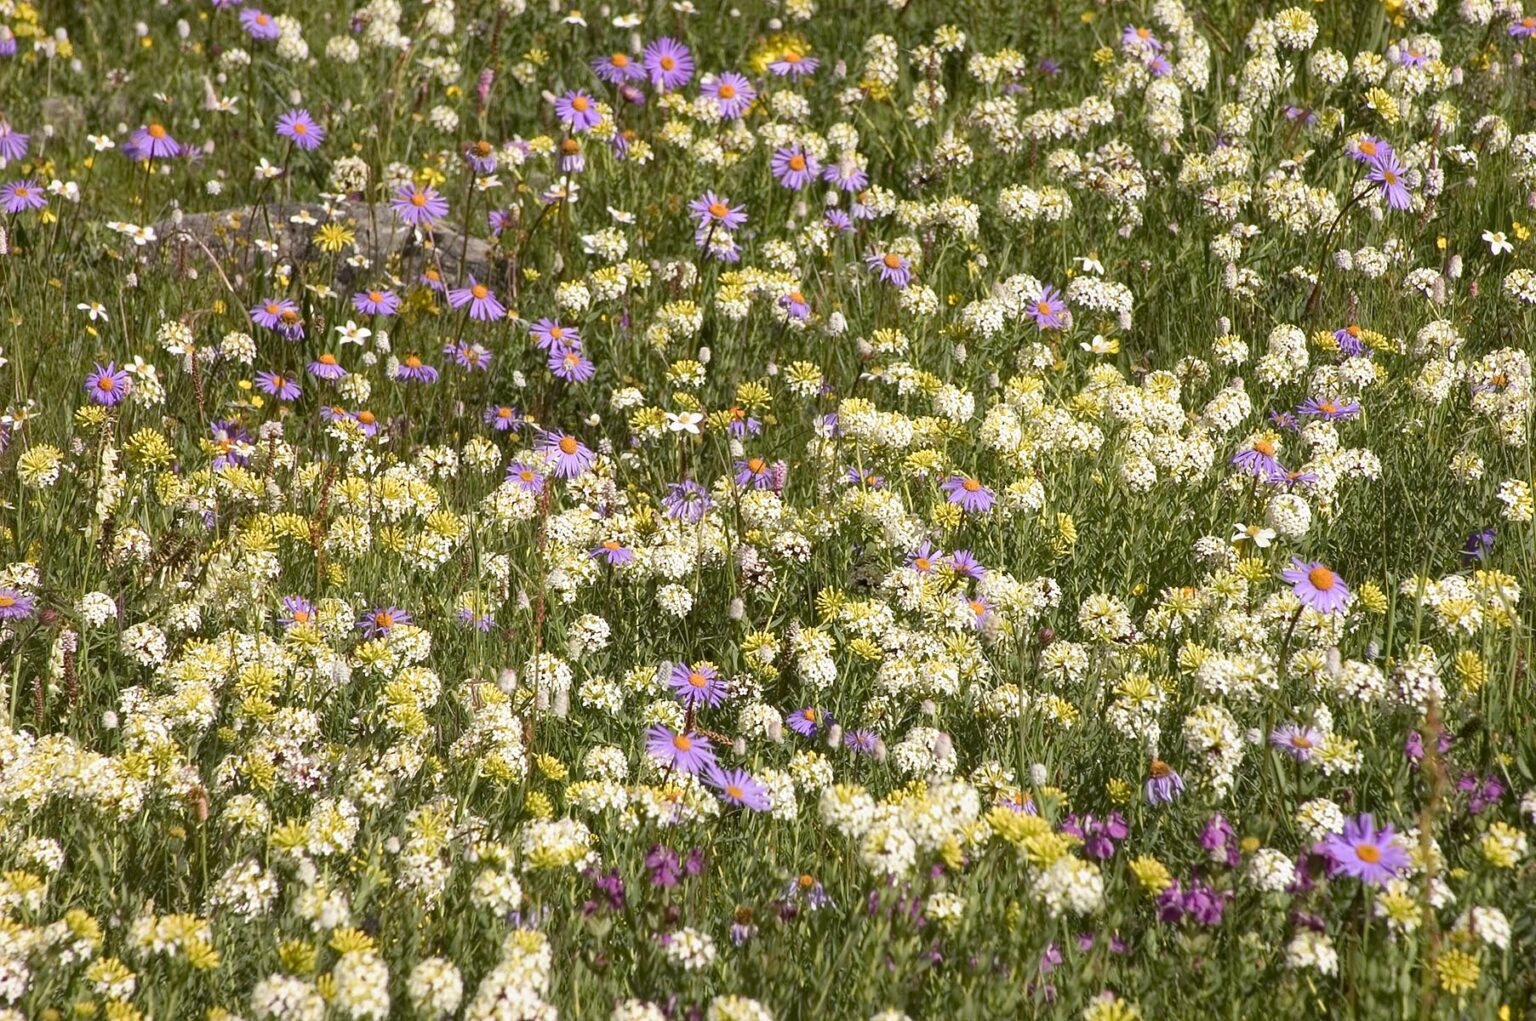 Fields of wildflowers including edelweiss & gentian cover the high altitude pastures - Kham (Eastern Tibet), Sichuan Province, China